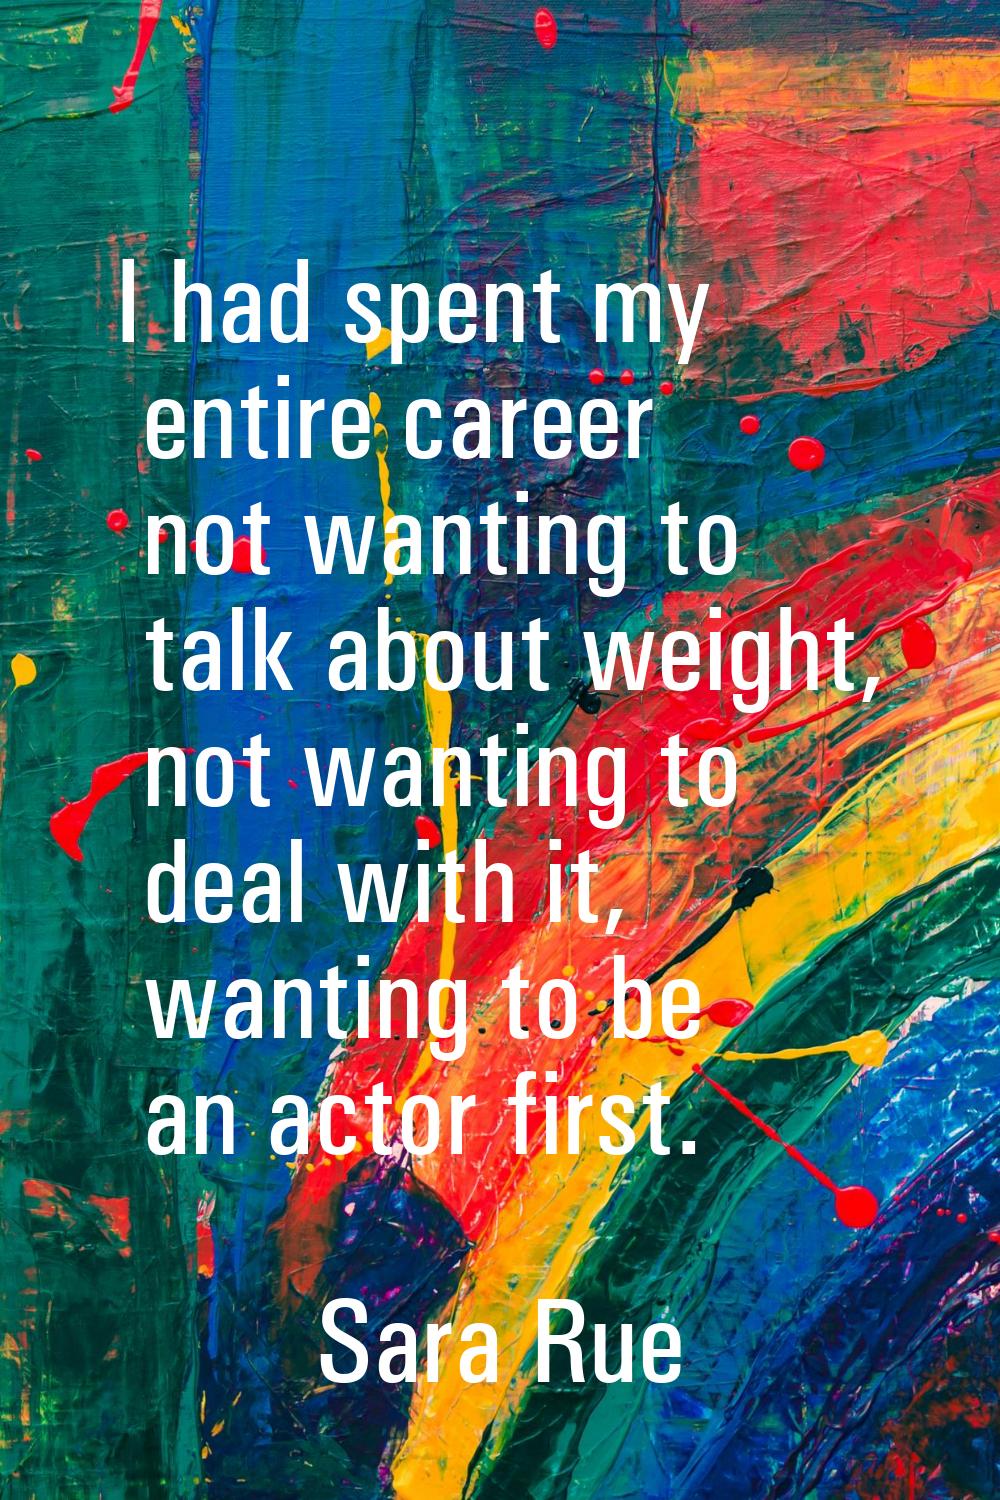 I had spent my entire career not wanting to talk about weight, not wanting to deal with it, wanting